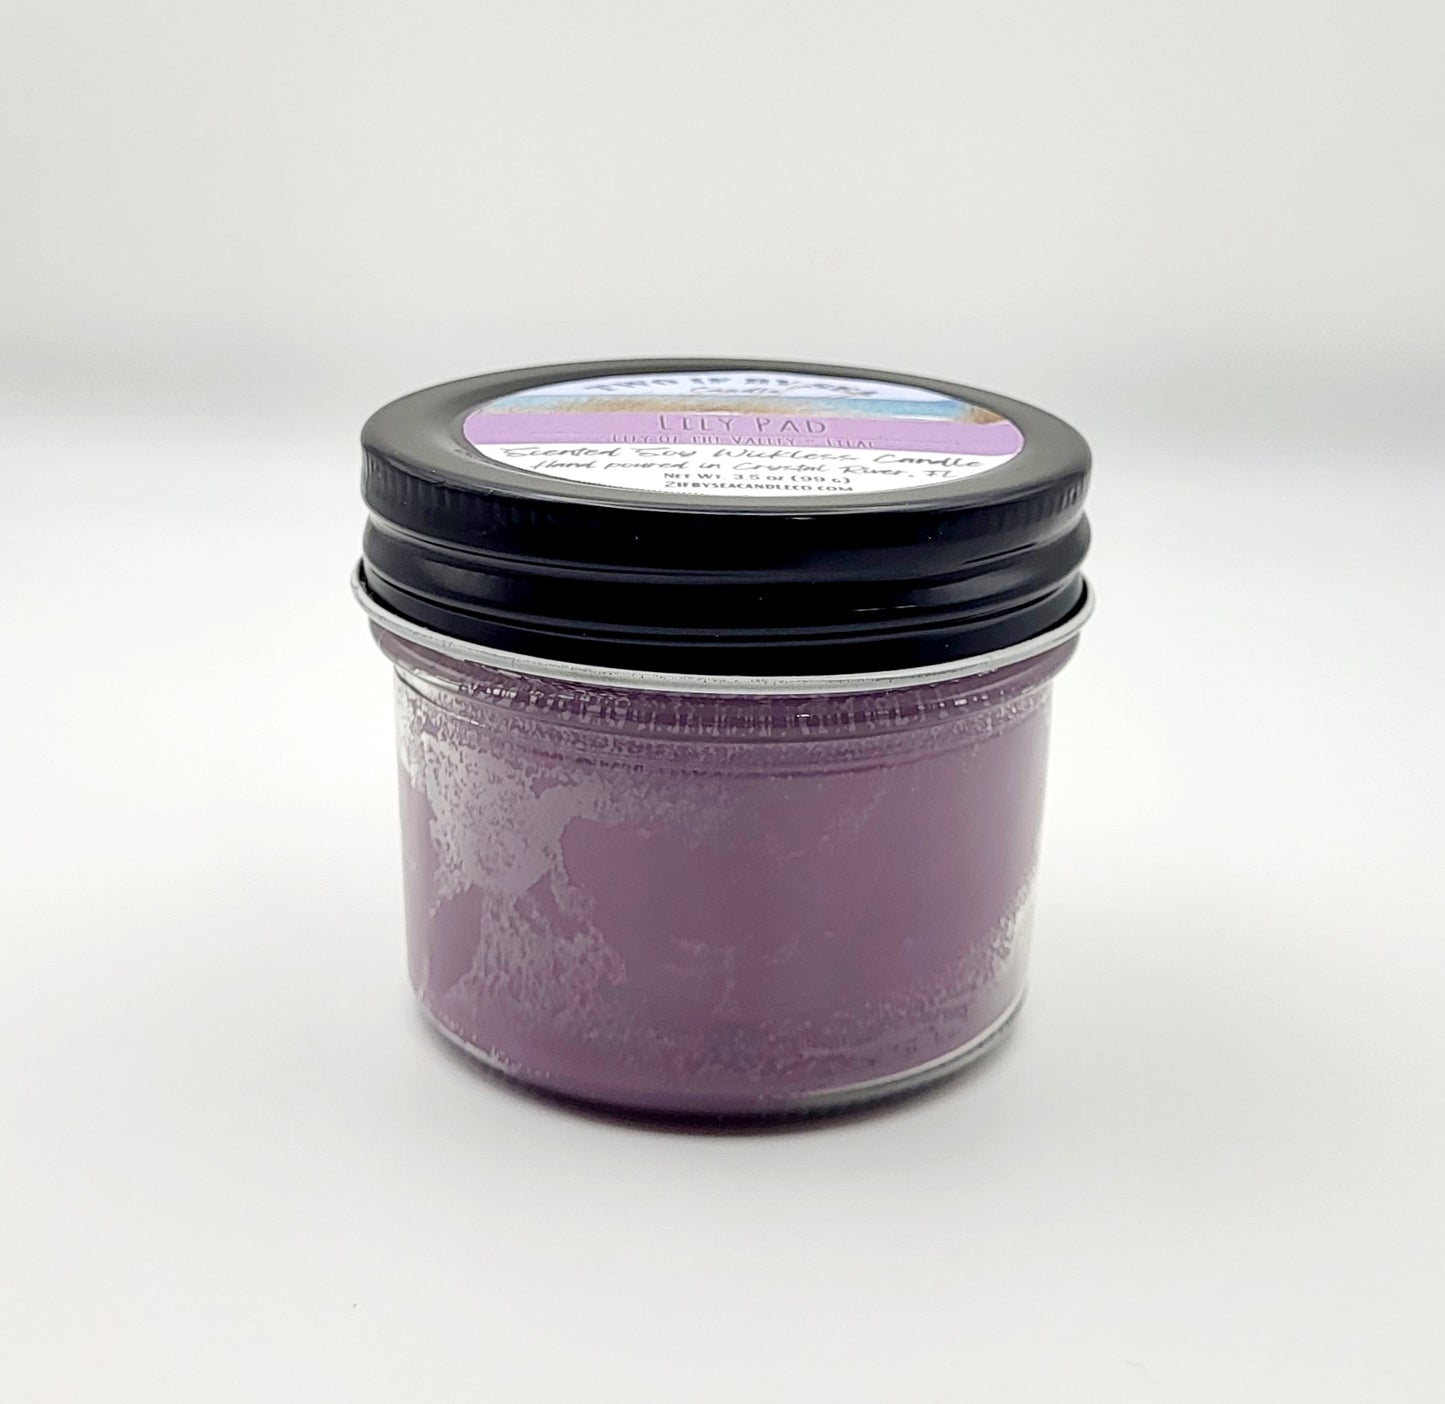 Lily Pad Scented Soy/Coconut Candle